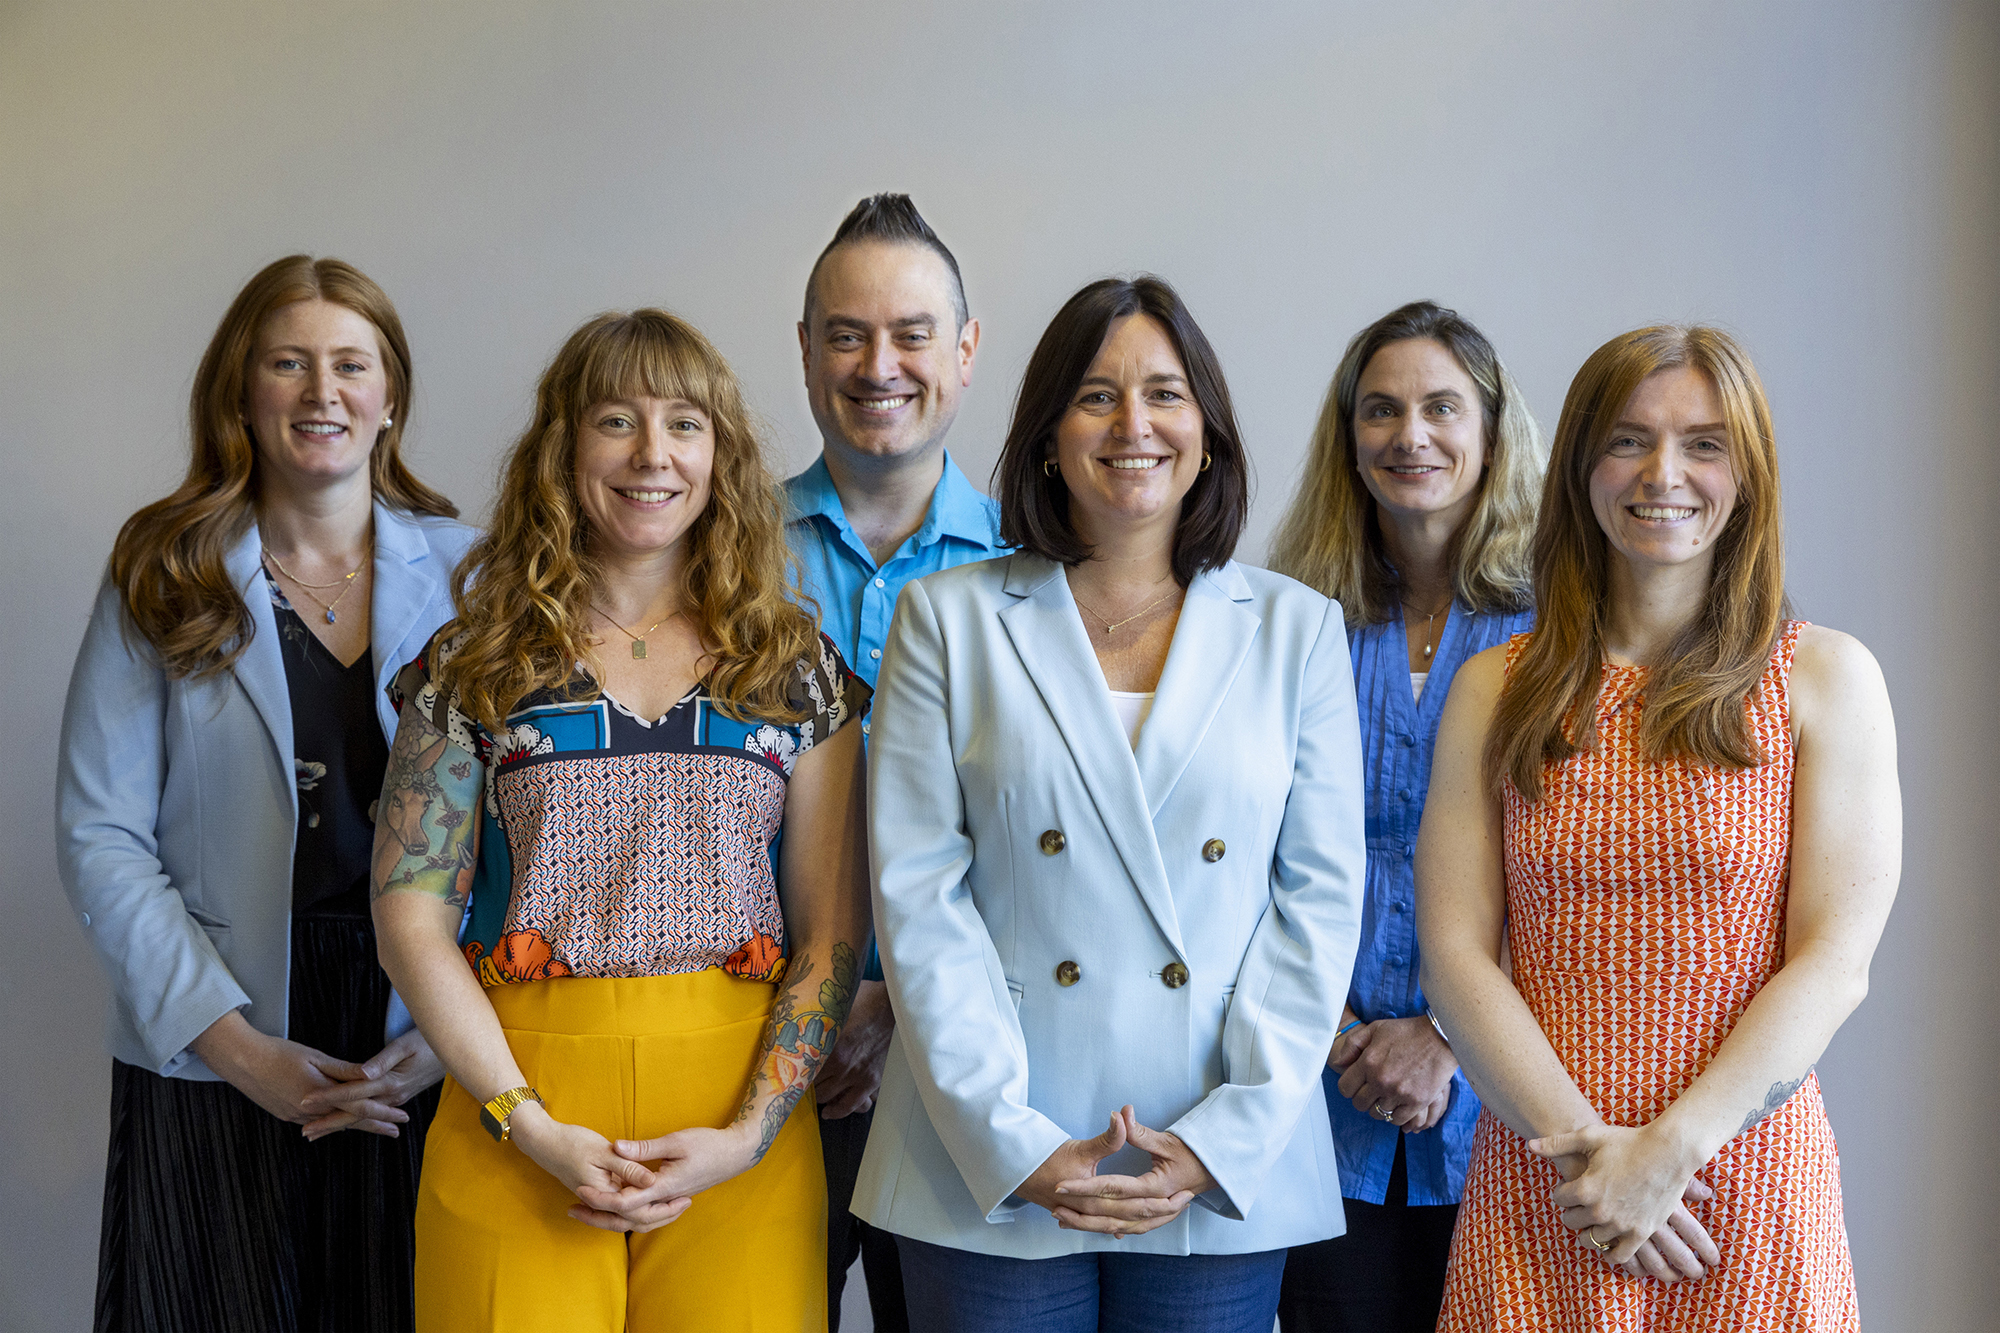 Group photo of the Endeavors team. In order, from left to right, Carleigh Gabryel, Alyssa LaFaro, Darren Abrecht, Layla Dowdy, Megan Mendenhall, and Corina Prassos.